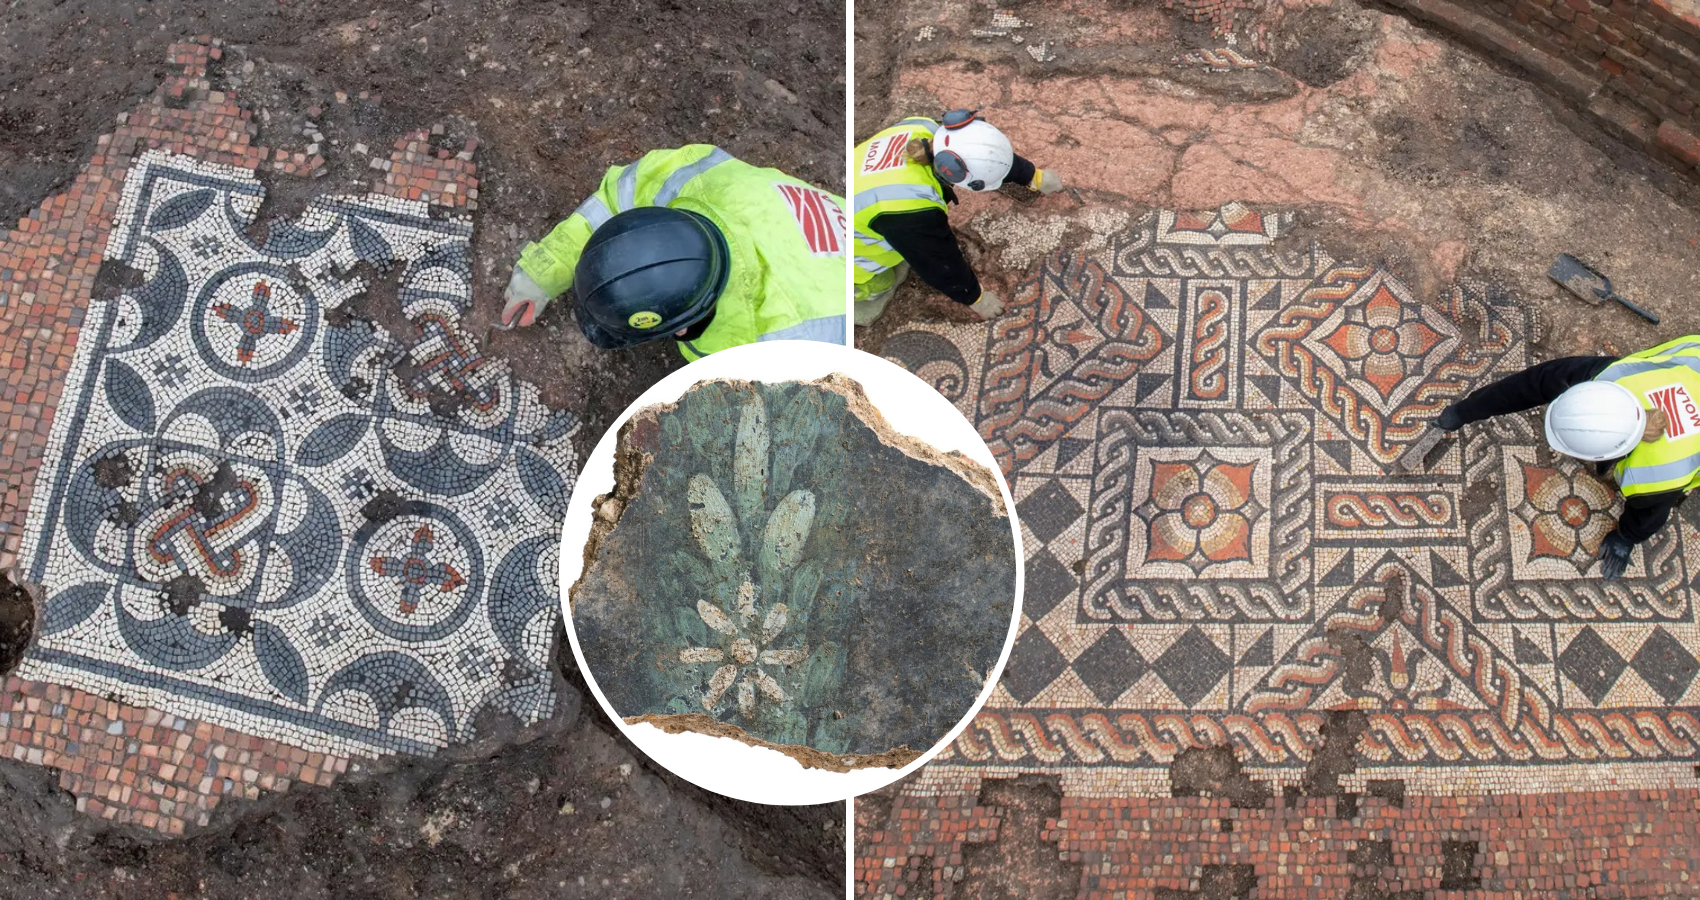 Intricate Roman mosaic is largest to be found in London in half a century